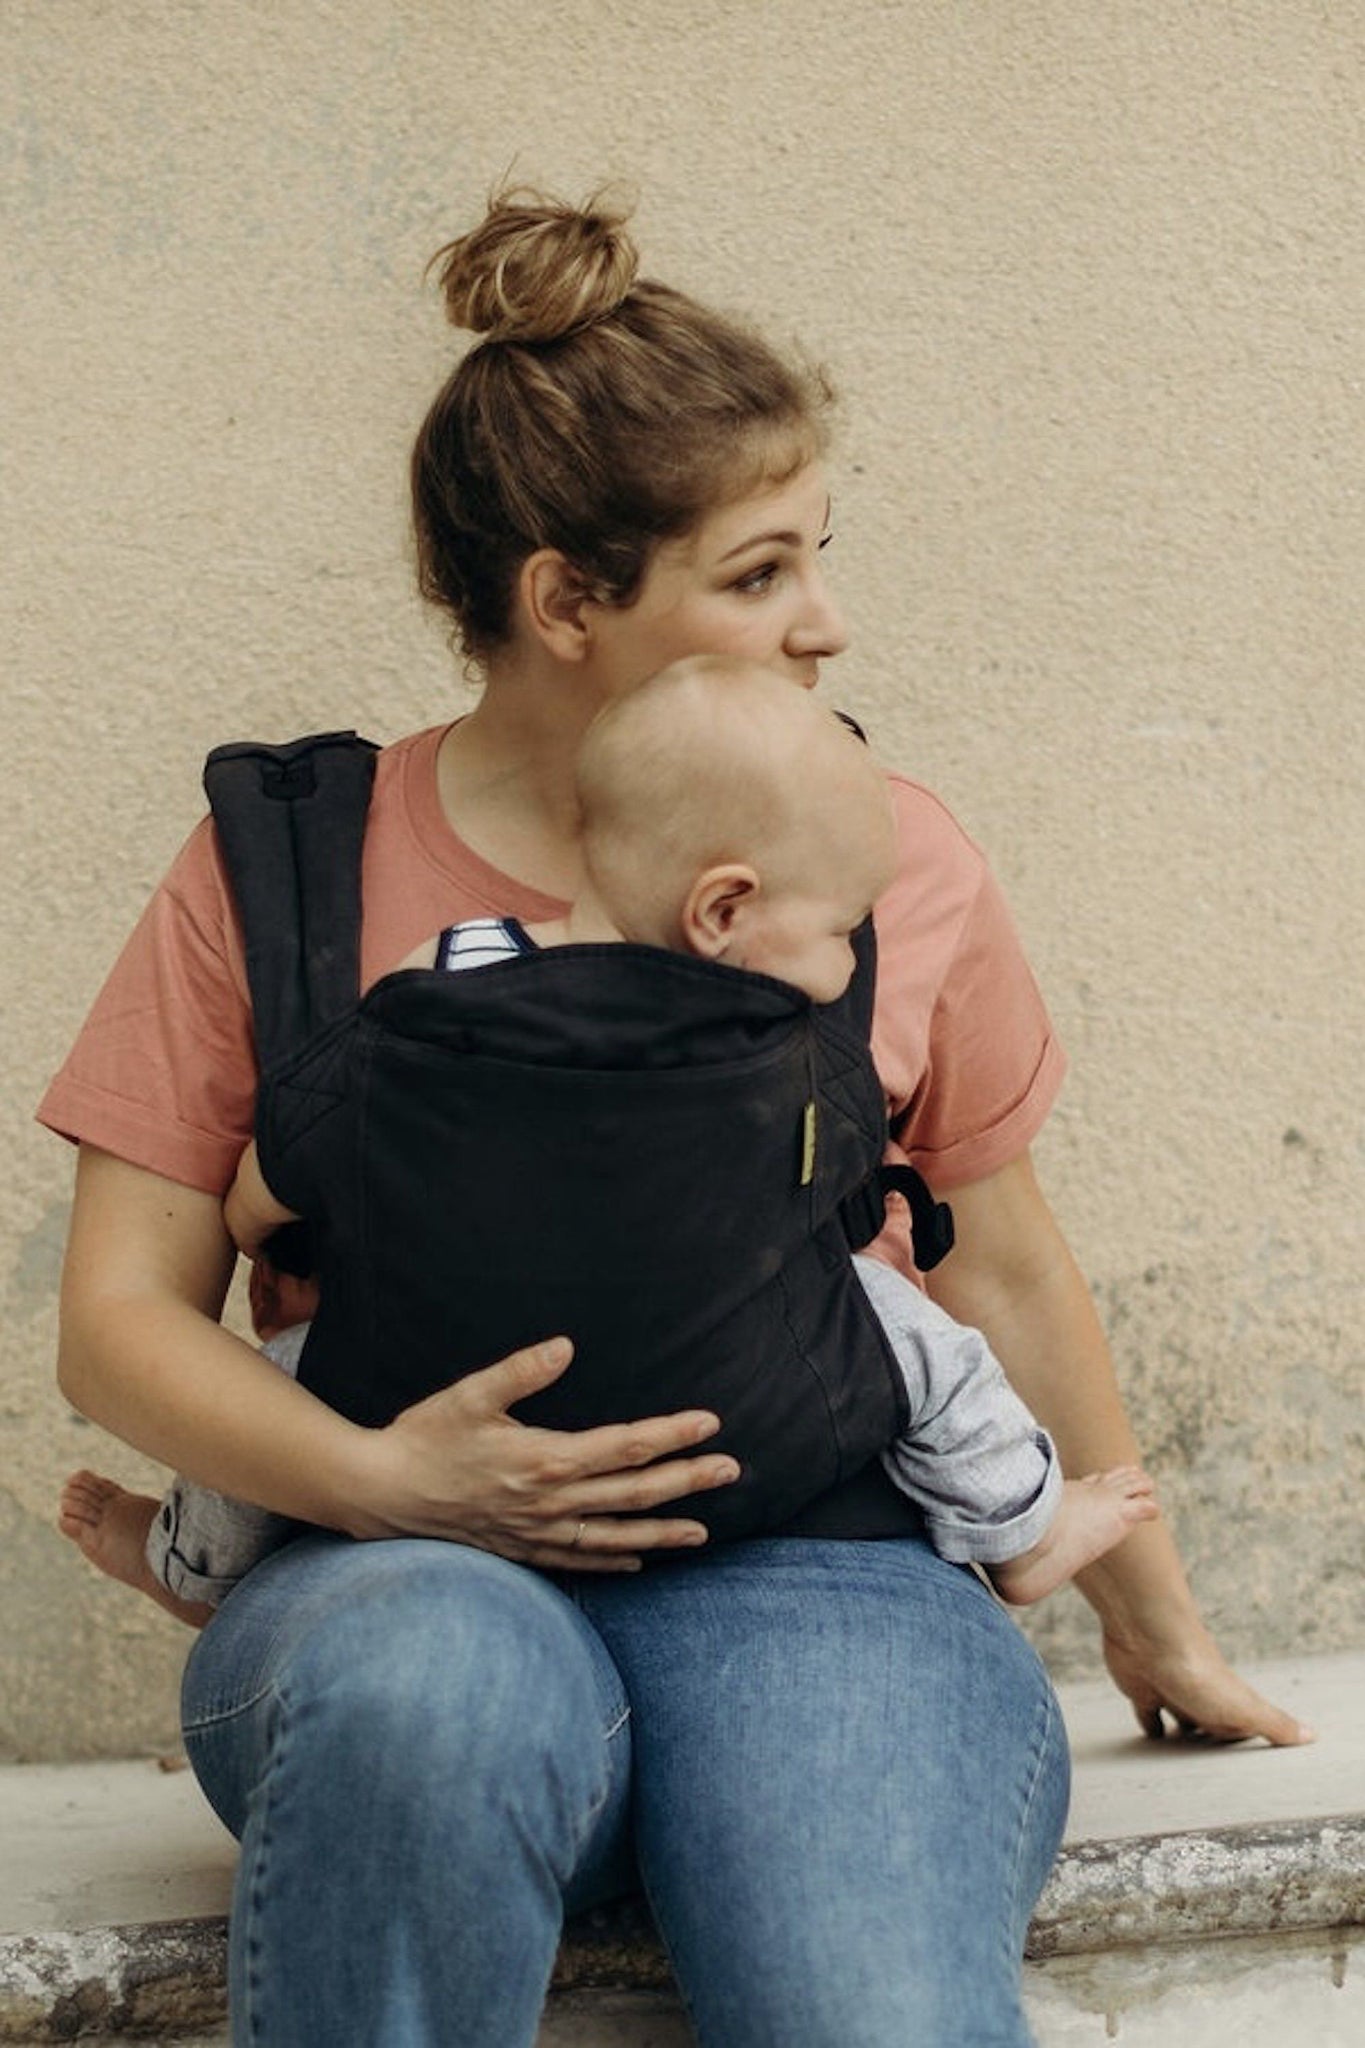 Boba classic baby carrier Organic Slate. Our streamlined soft structured baby carrier is designed to go and grow with your little one. This ergonomic front facing baby carrier is ready to use from infant to toddler.